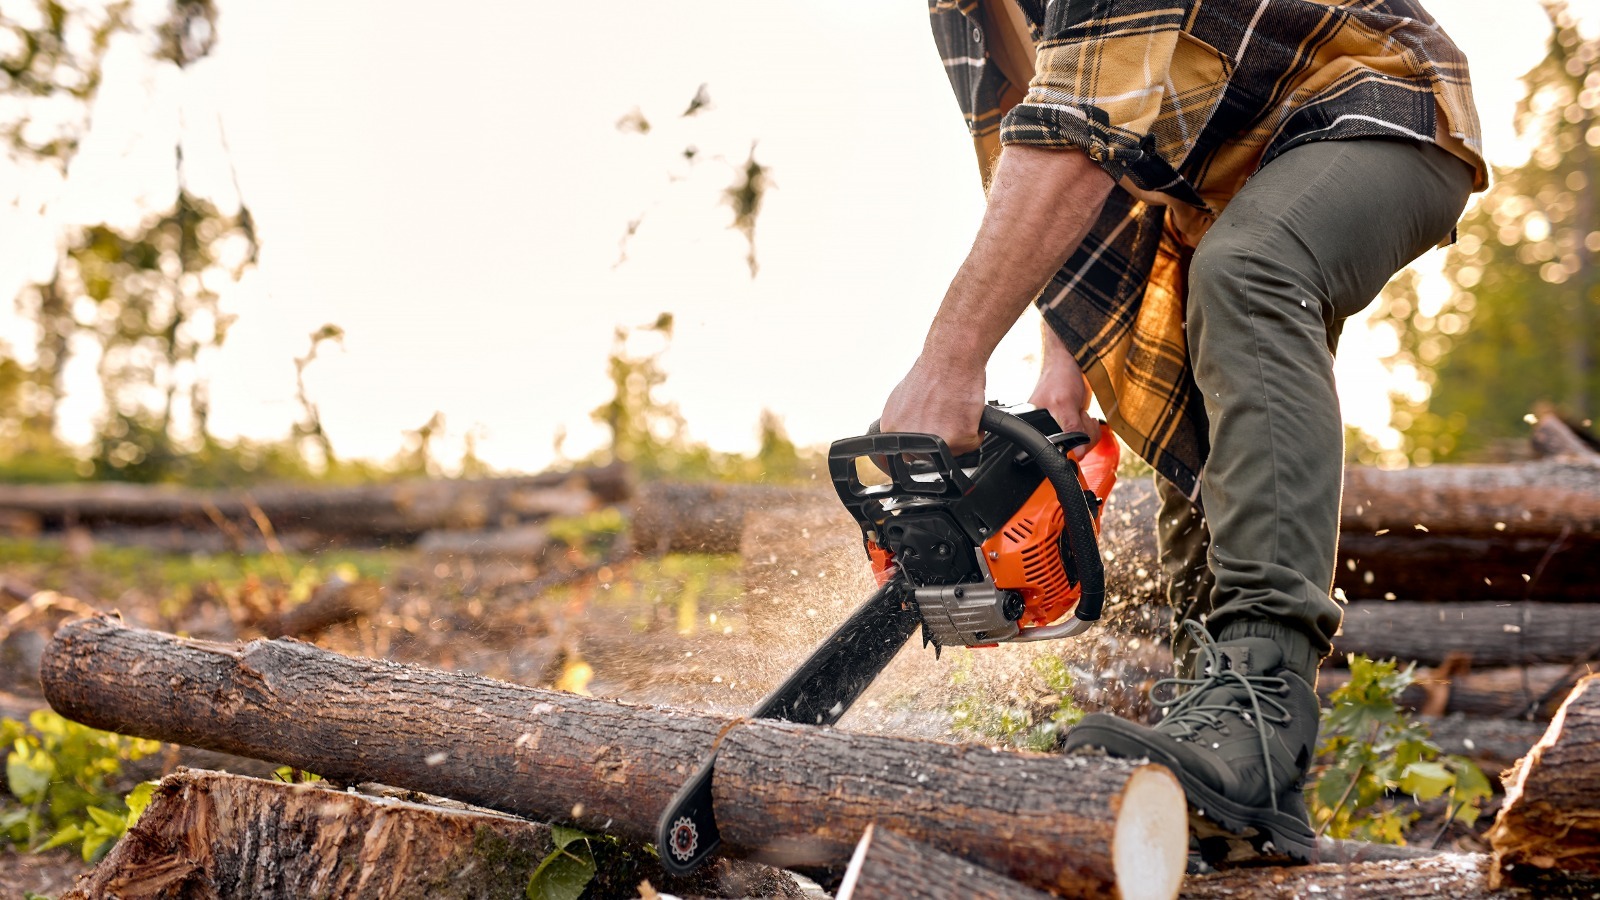 Harbor Freight Vs. Home Depot: Which Offers The Better Value For Chainsaws?